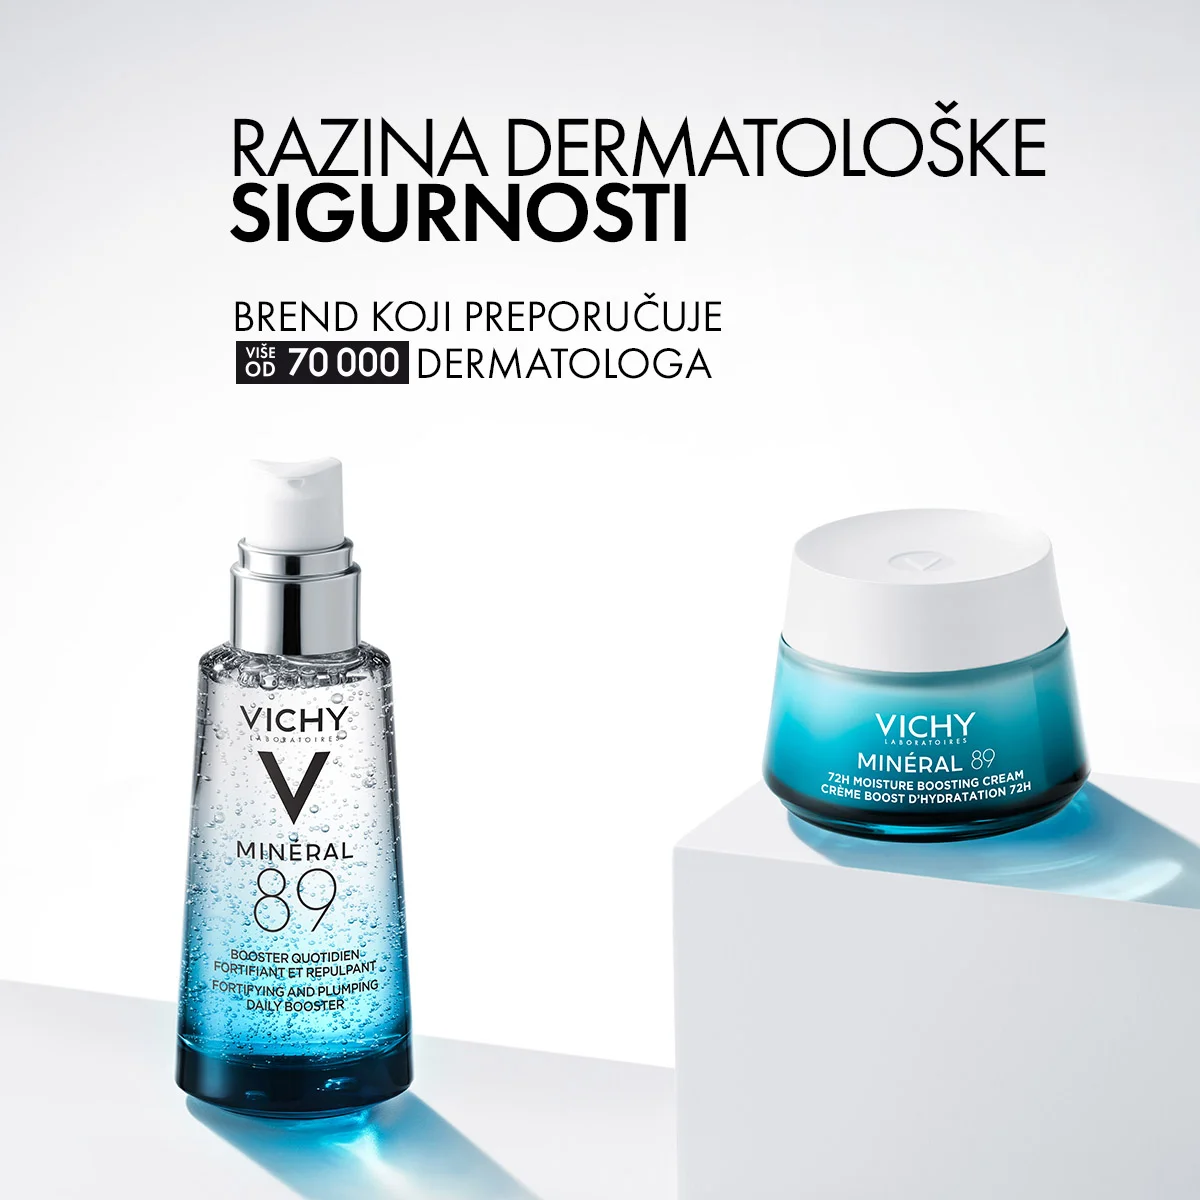 Vichy MINERAL 89 Protocol for intensive hydration and stronger skin for all skin types (7)